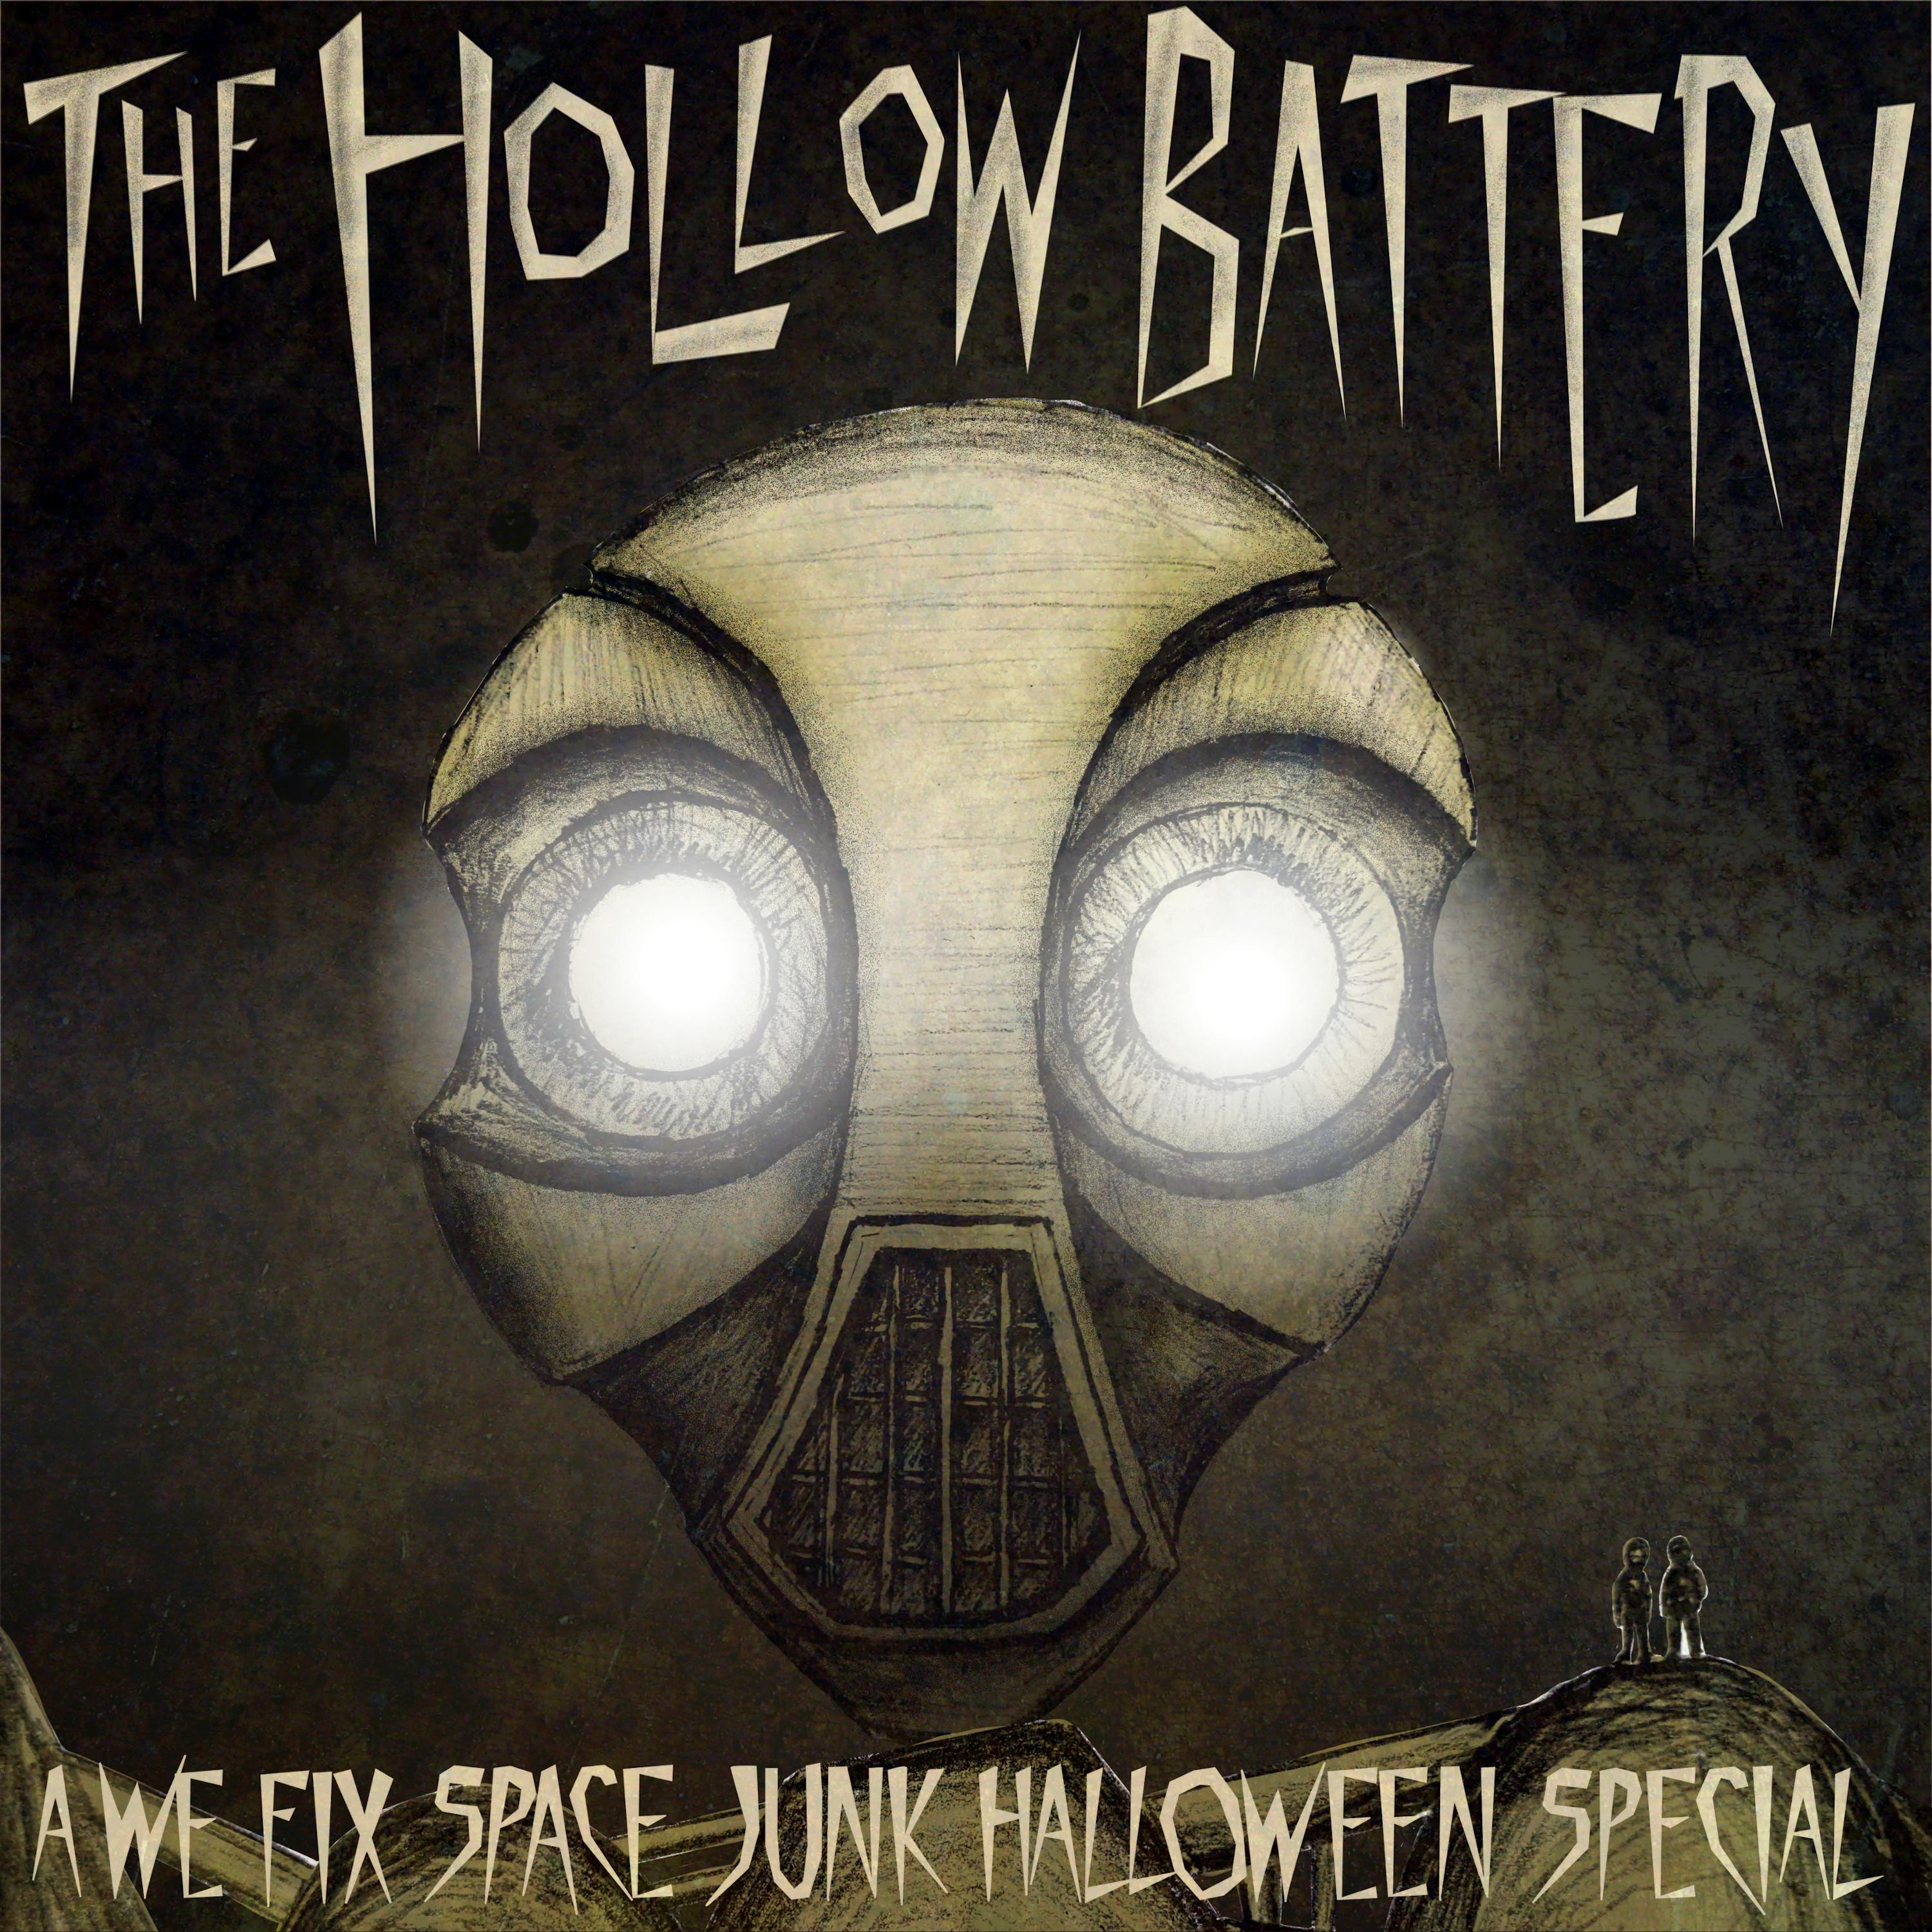 The Hollow Battery: A We Fix Space Junk Halloween Special!